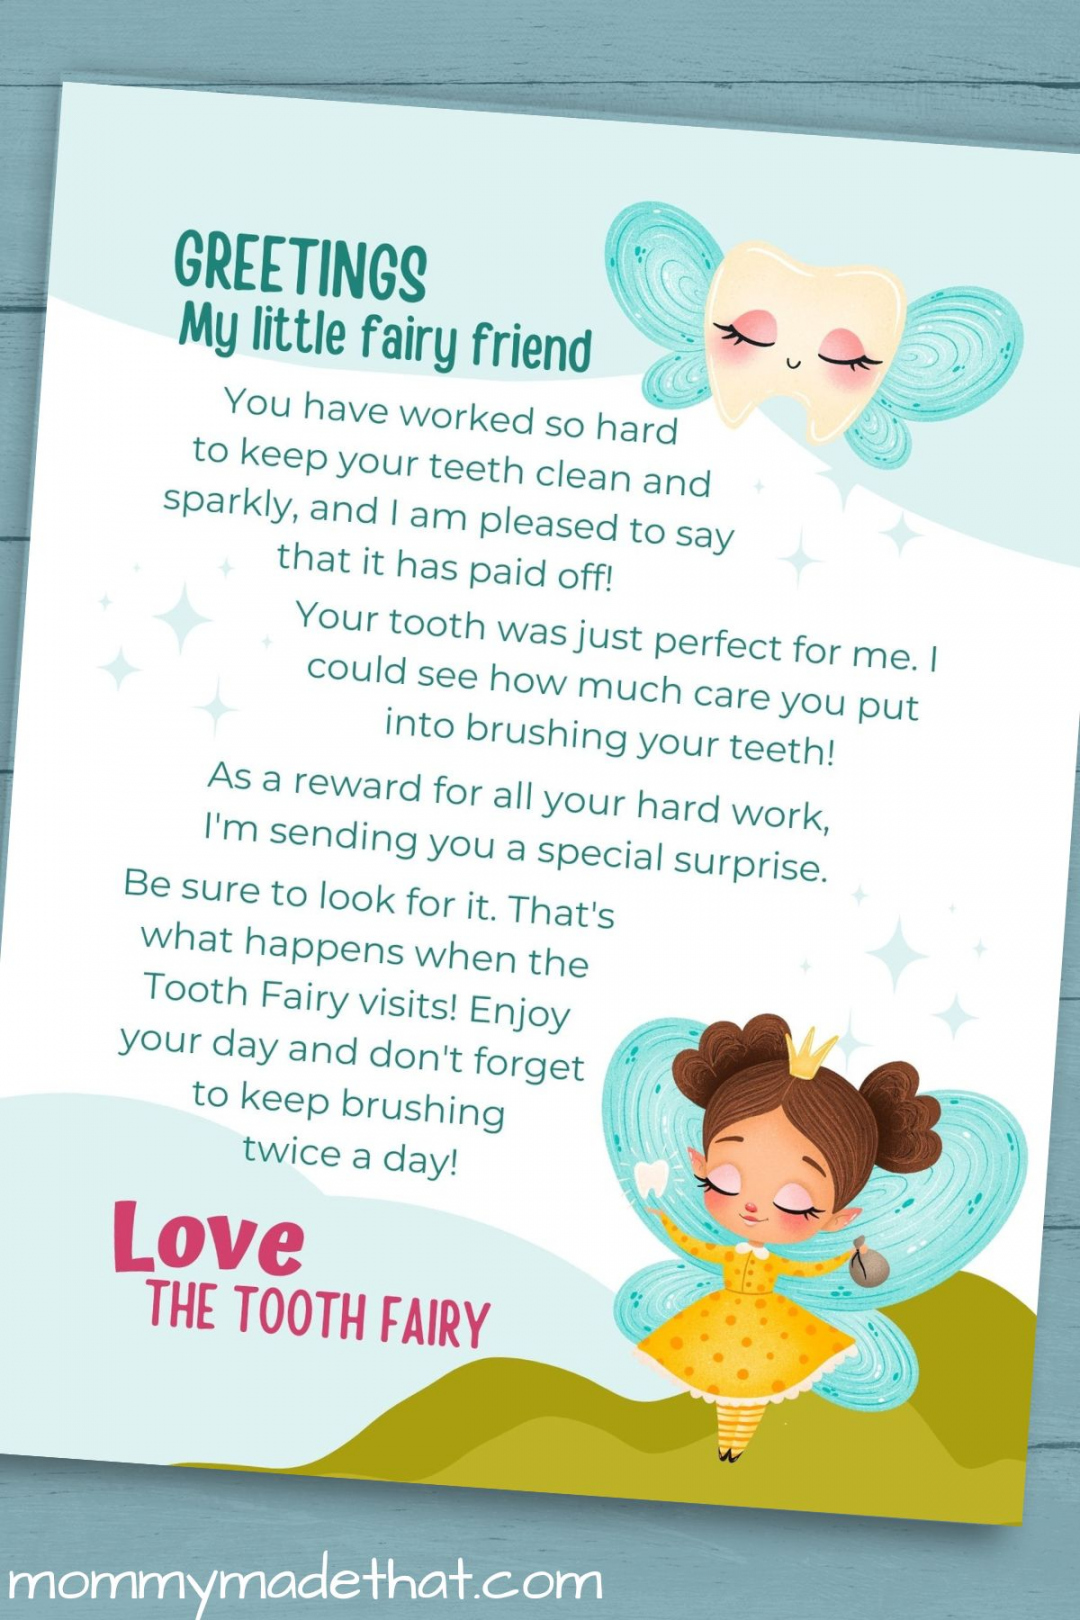 Printable Tooth Fairy Letters (Lots of cute free printables!) - FREE Printables - Free Printable Tooth Fairy Letter And Envelope